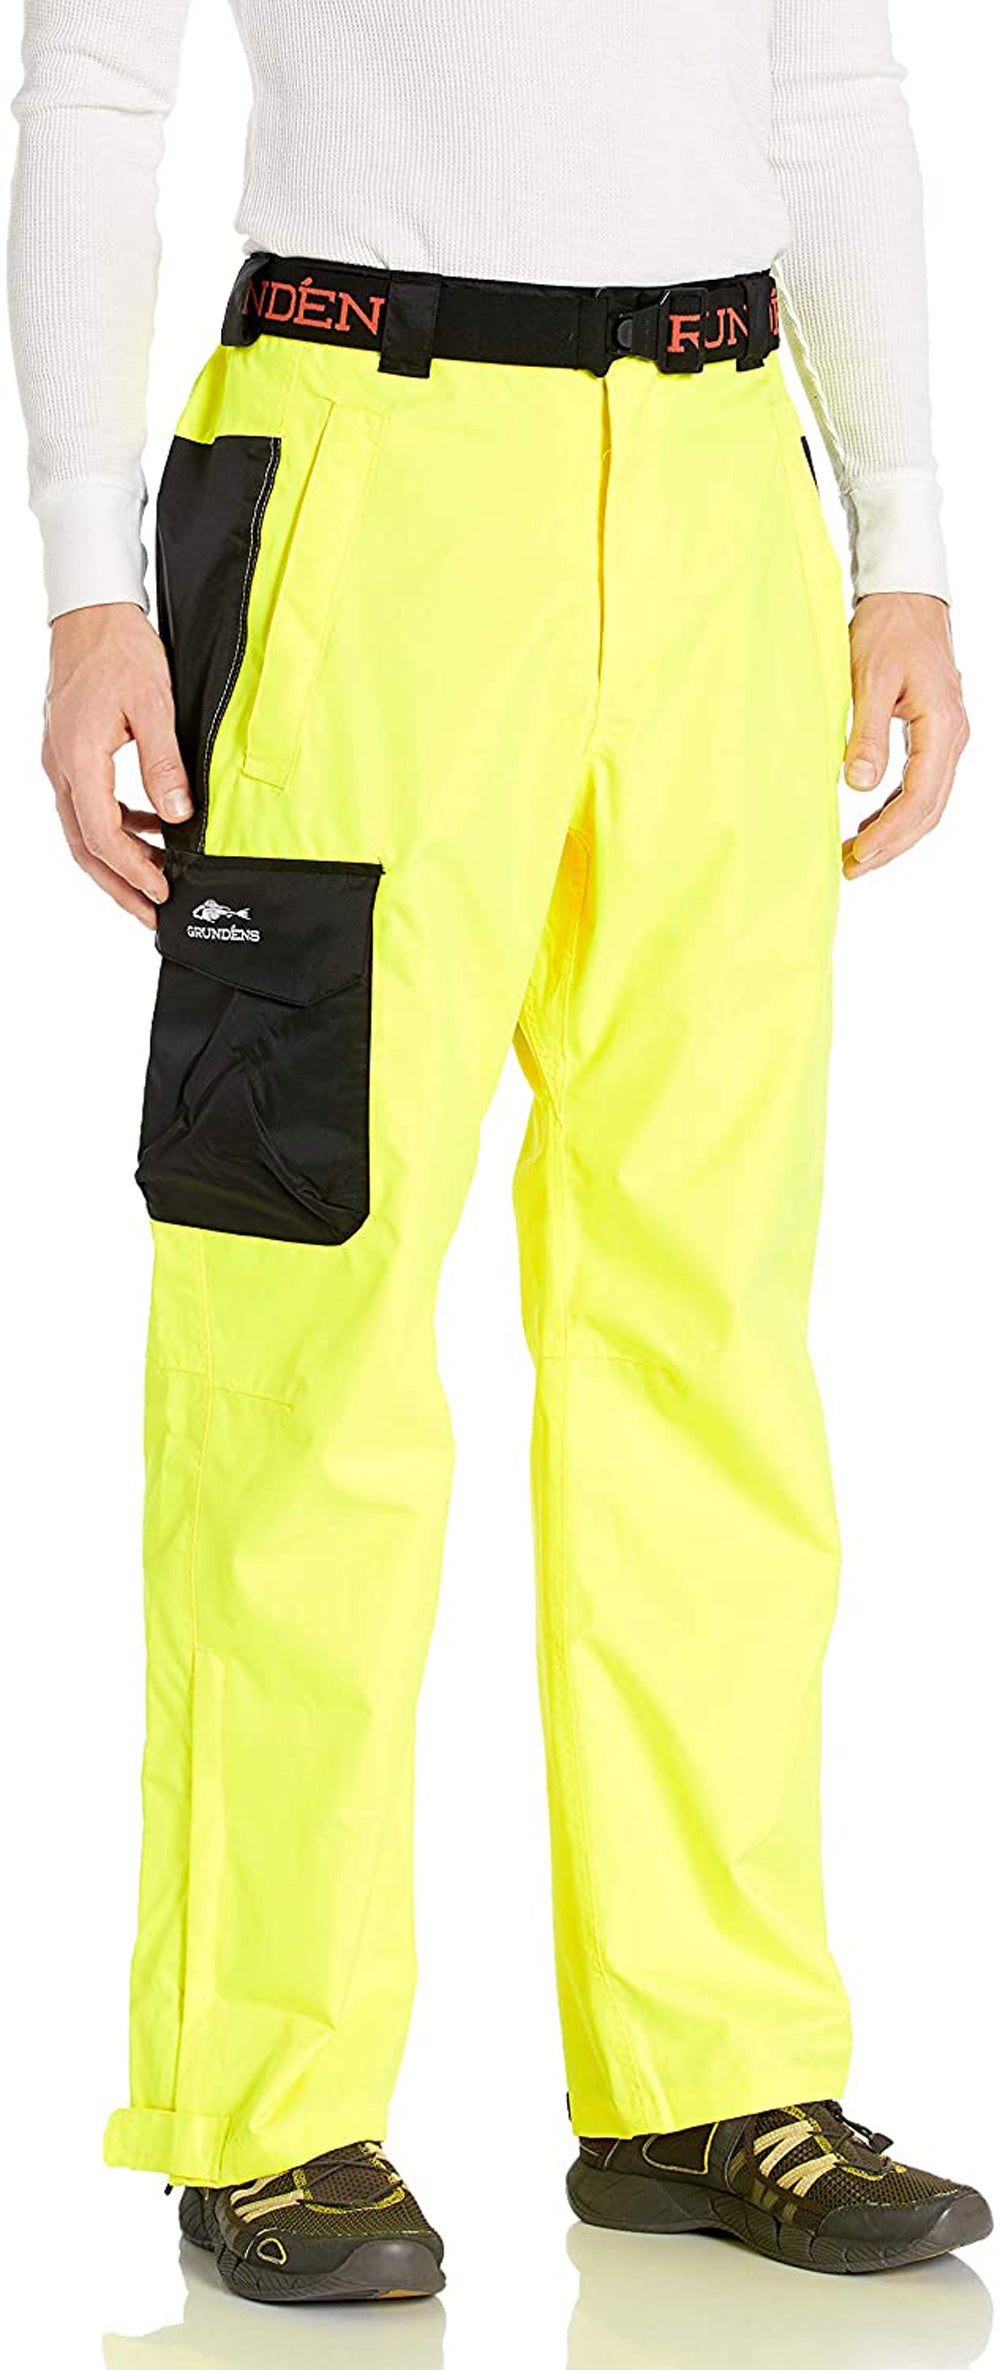 Weather Watch Pant in Hi Vis Yellow color from the front view